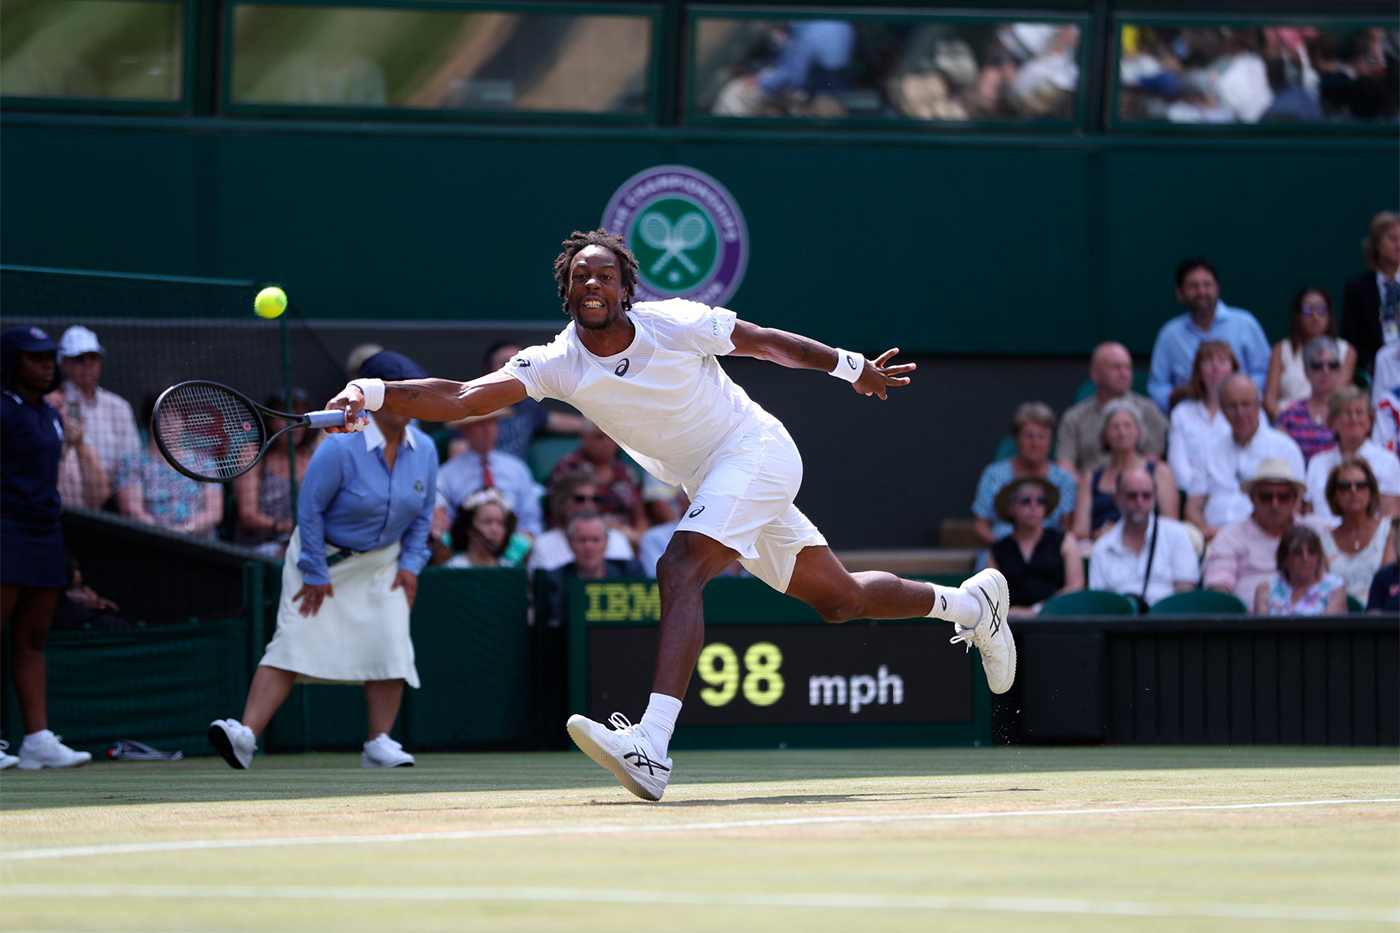 Monfils hopes he is coming to terms with grass The Championships